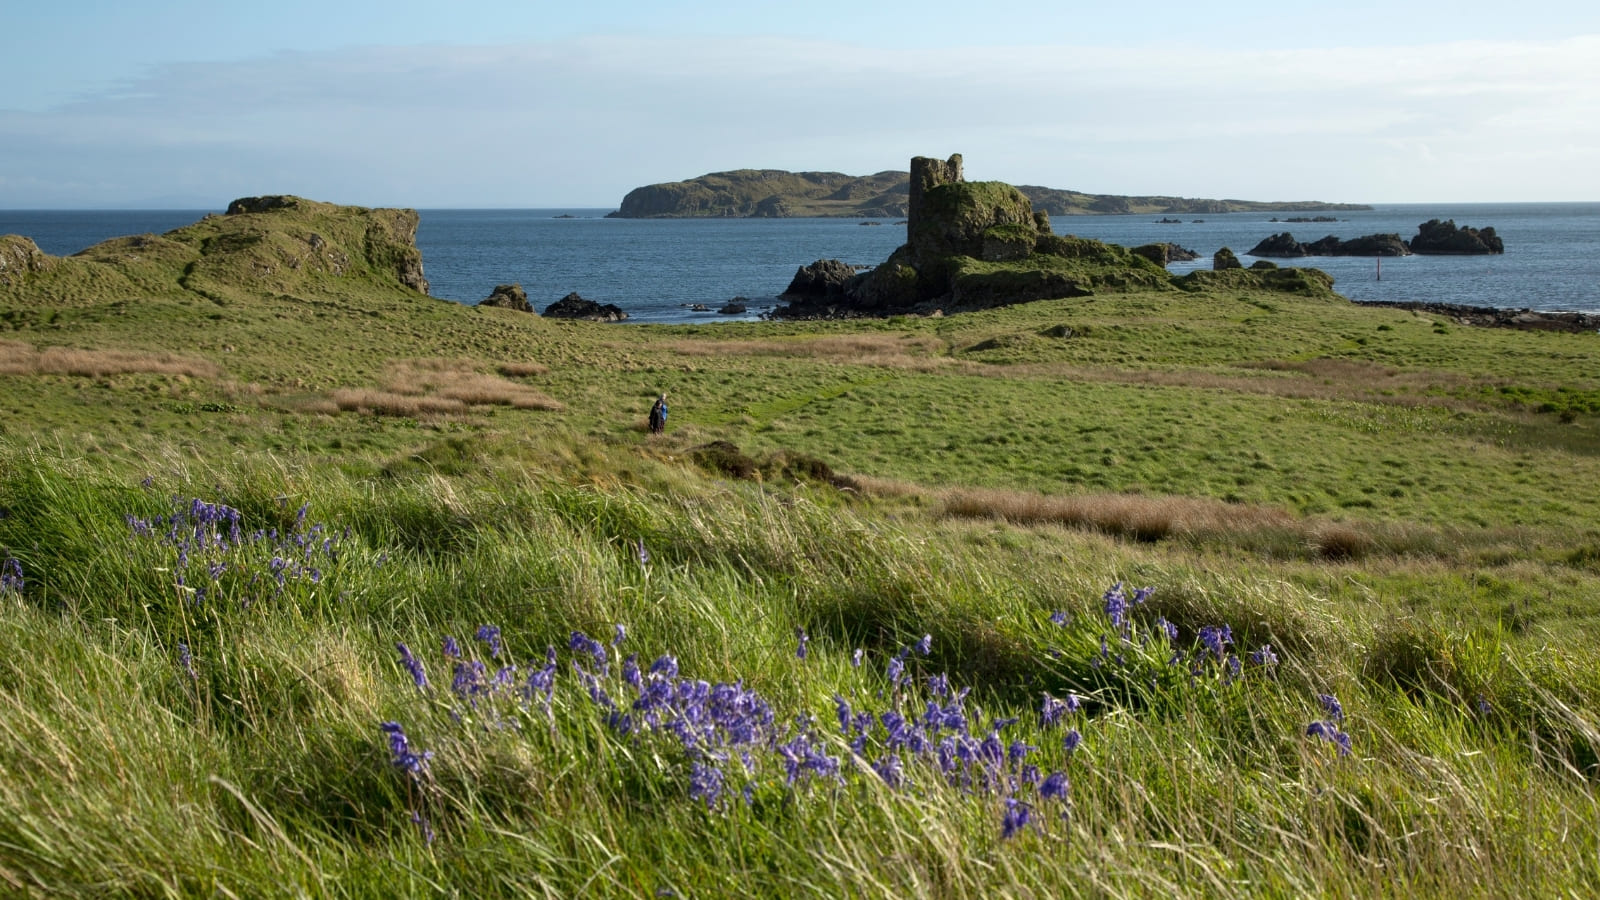 A grassy landscape lies in front of a beautiful castle, beyond it is the blue sea